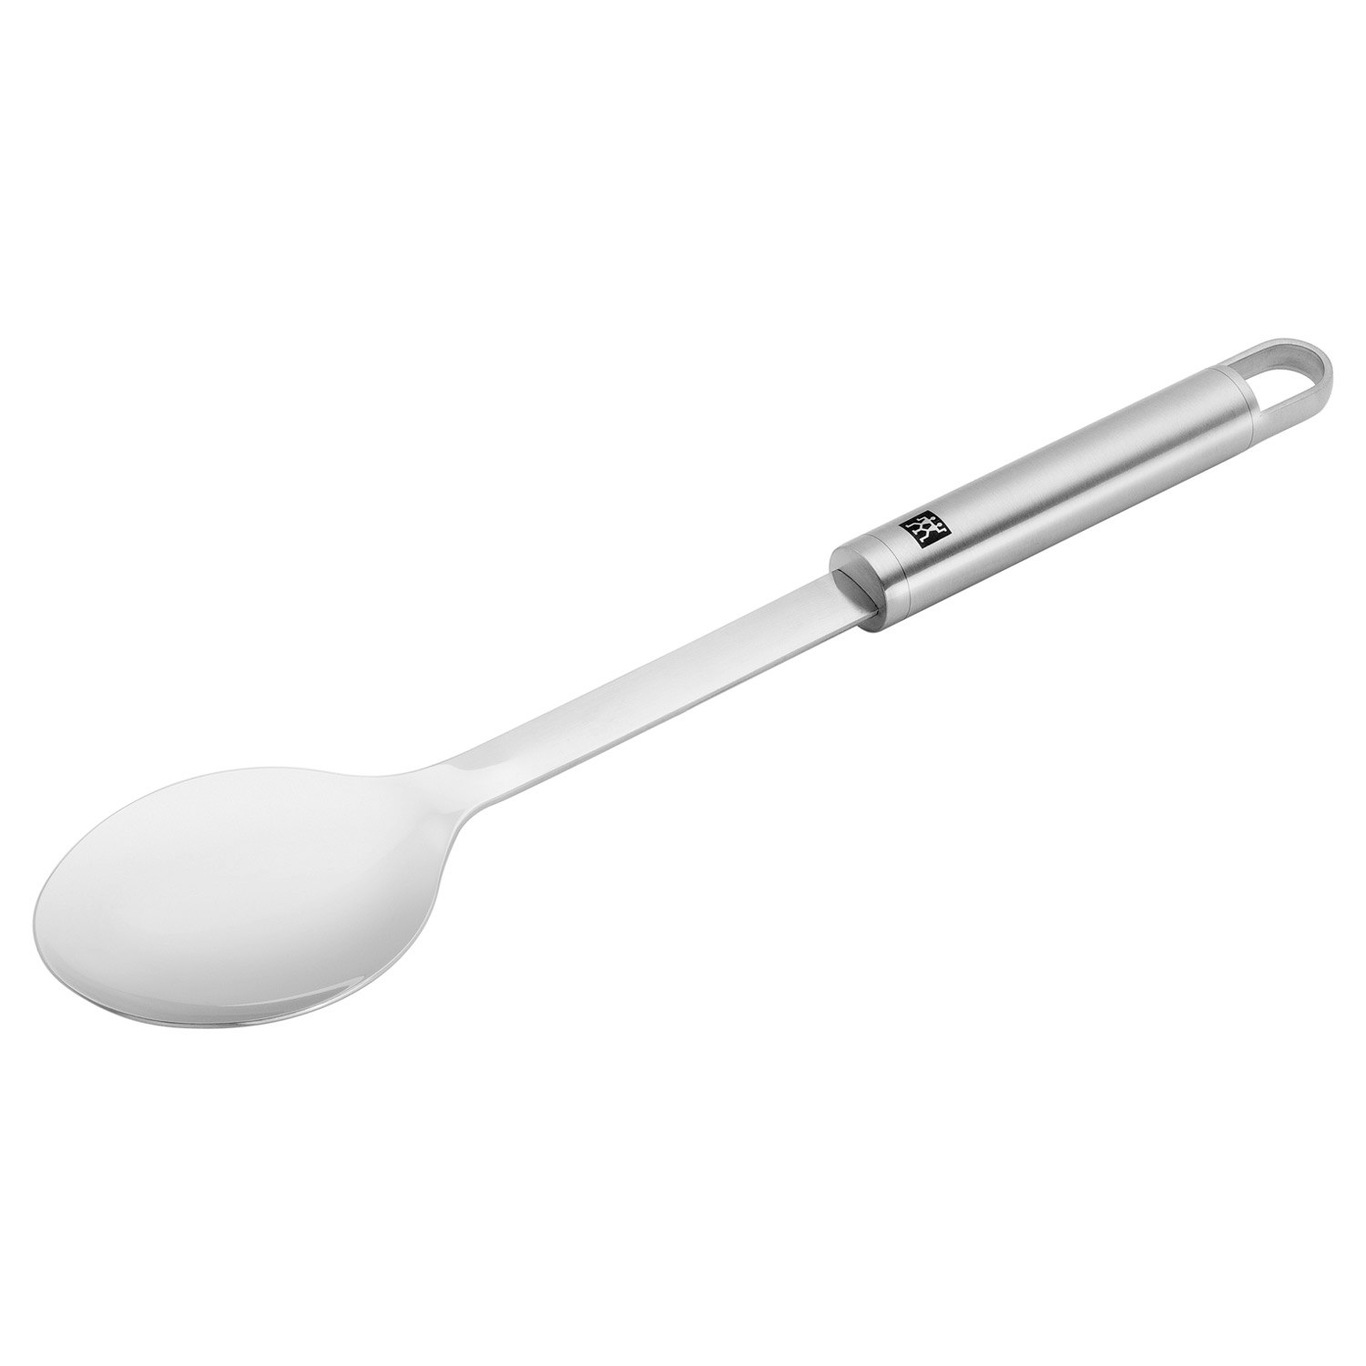 https://royaldesign.com/image/2/zwilling-pro-cooking-spoon-32-cm-0?w=800&quality=80